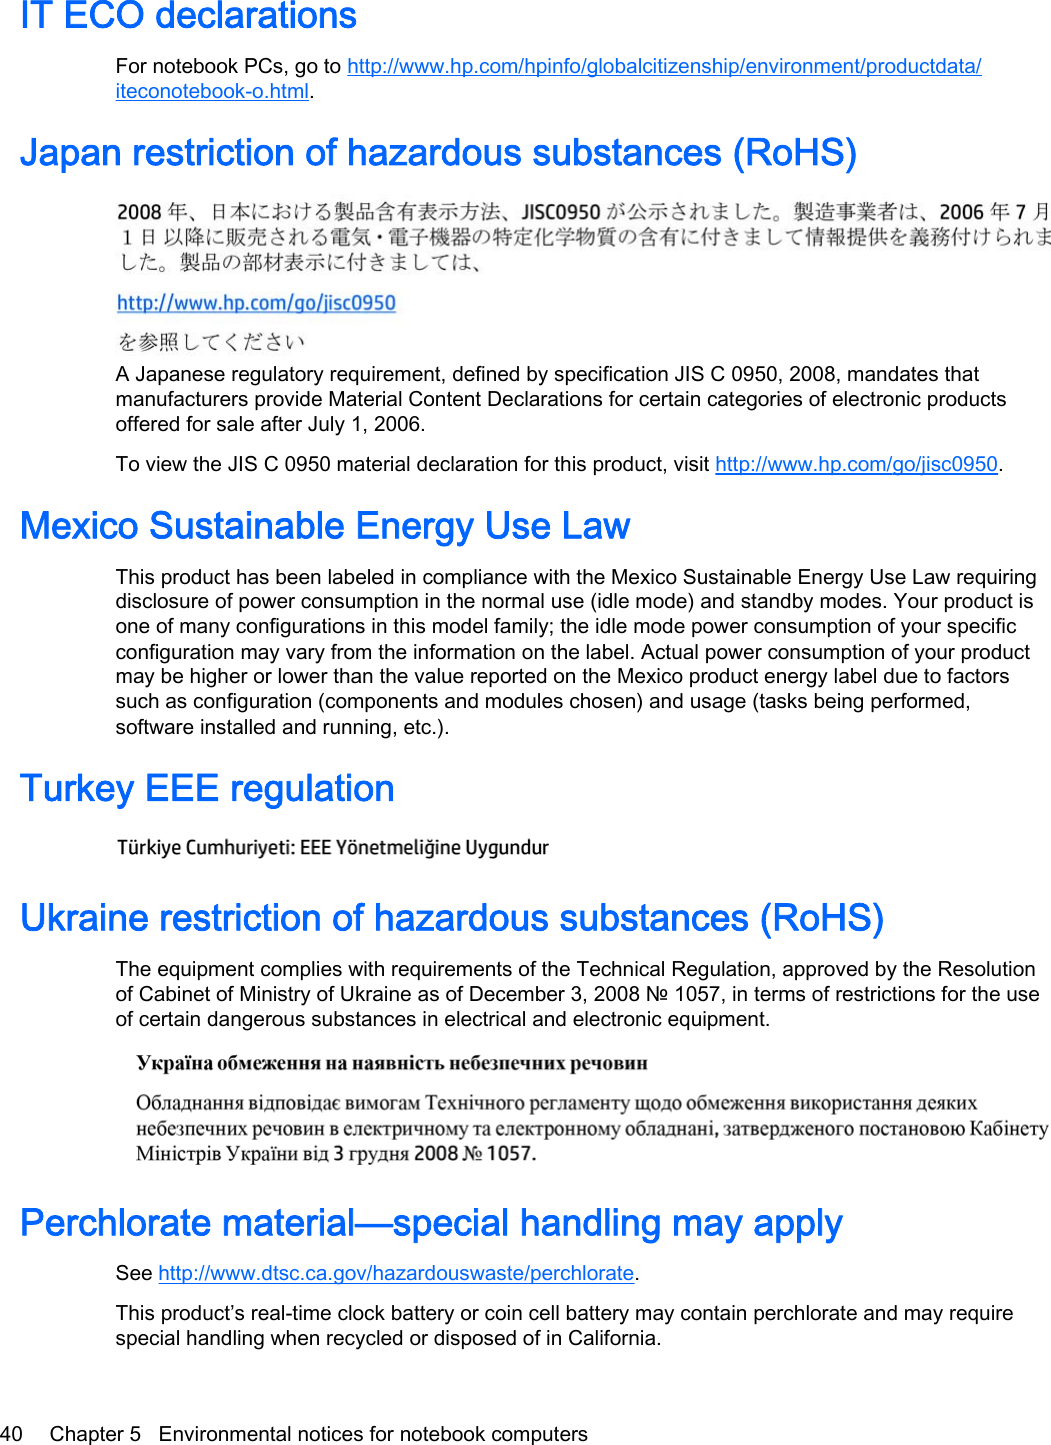 IT ECO declarationsFor notebook PCs, go to http://www.hp.com/hpinfo/globalcitizenship/environment/productdata/iteconotebook-o.html.Japan restriction of hazardous substances (RoHS)A Japanese regulatory requirement, defined by specification JIS C 0950, 2008, mandates thatmanufacturers provide Material Content Declarations for certain categories of electronic productsoffered for sale after July 1, 2006.To view the JIS C 0950 material declaration for this product, visit http://www.hp.com/go/jisc0950.Mexico Sustainable Energy Use LawThis product has been labeled in compliance with the Mexico Sustainable Energy Use Law requiringdisclosure of power consumption in the normal use (idle mode) and standby modes. Your product isone of many configurations in this model family; the idle mode power consumption of your specificconfiguration may vary from the information on the label. Actual power consumption of your productmay be higher or lower than the value reported on the Mexico product energy label due to factorssuch as configuration (components and modules chosen) and usage (tasks being performed,software installed and running, etc.).Turkey EEE regulationUkraine restriction of hazardous substances (RoHS)The equipment complies with requirements of the Technical Regulation, approved by the Resolutionof Cabinet of Ministry of Ukraine as of December 3, 2008 № 1057, in terms of restrictions for the useof certain dangerous substances in electrical and electronic equipment.Perchlorate material—special handling may applySee http://www.dtsc.ca.gov/hazardouswaste/perchlorate.This product’s real-time clock battery or coin cell battery may contain perchlorate and may requirespecial handling when recycled or disposed of in California. 40 Chapter 5   Environmental notices for notebook computers